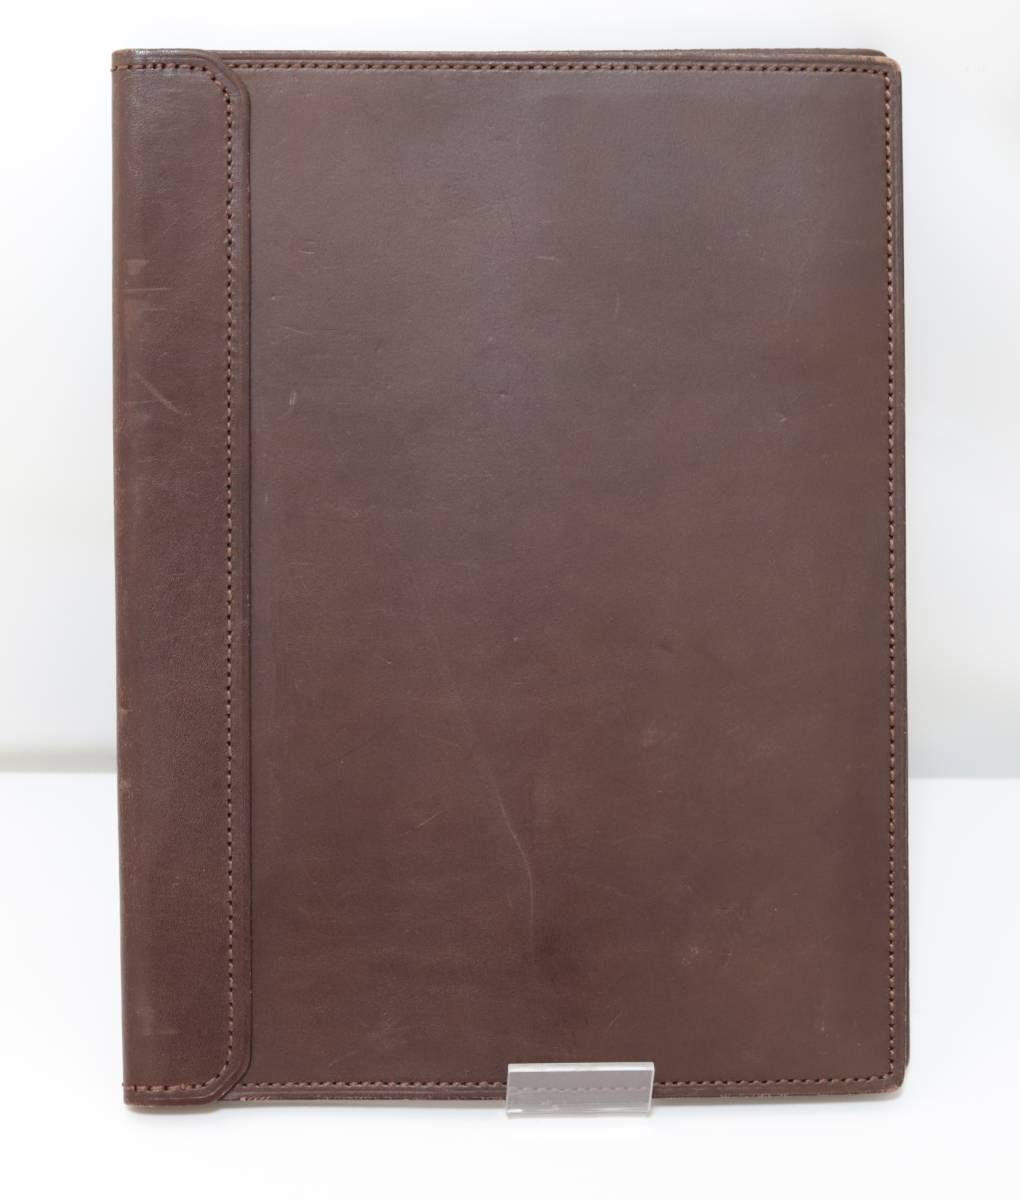  prompt decision total leather * rare rare records out of production earth shop bag nachu-la cow leather B5 Note cover book cover pocketbook cover leather leather Brown 